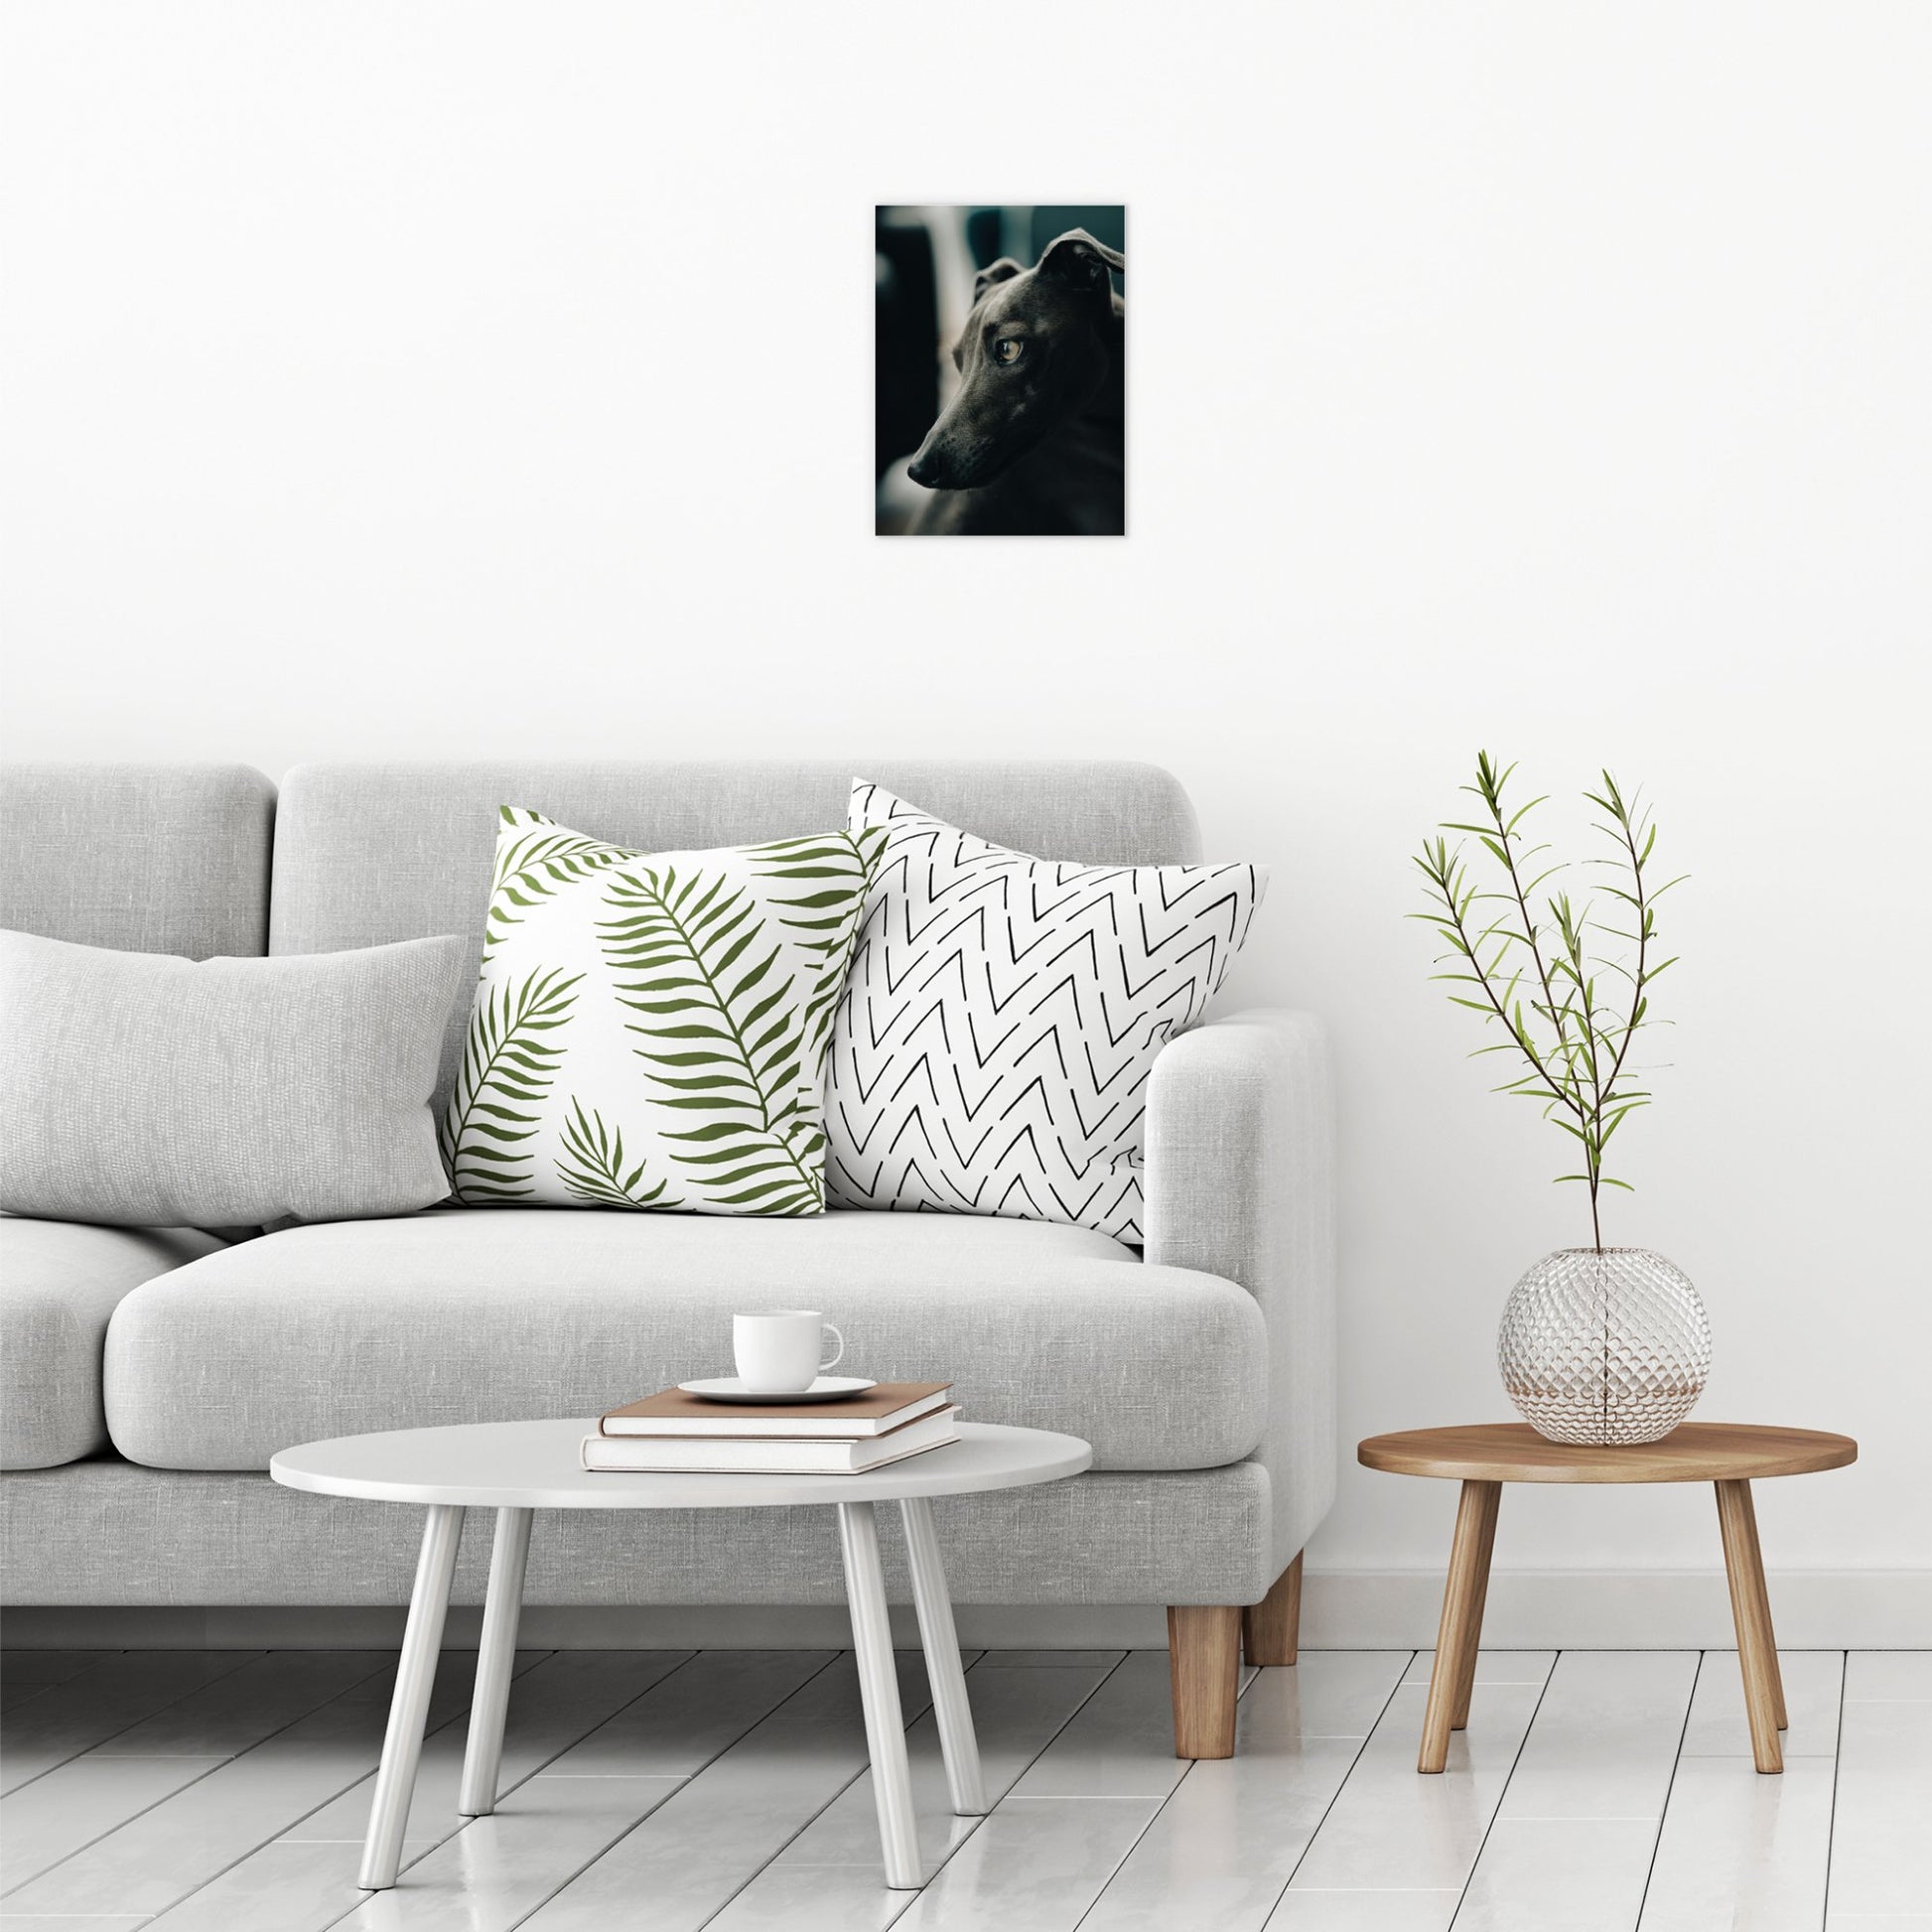 A contemporary modern room view showing a small size metal art poster display plate with printed design of a Black Whippet